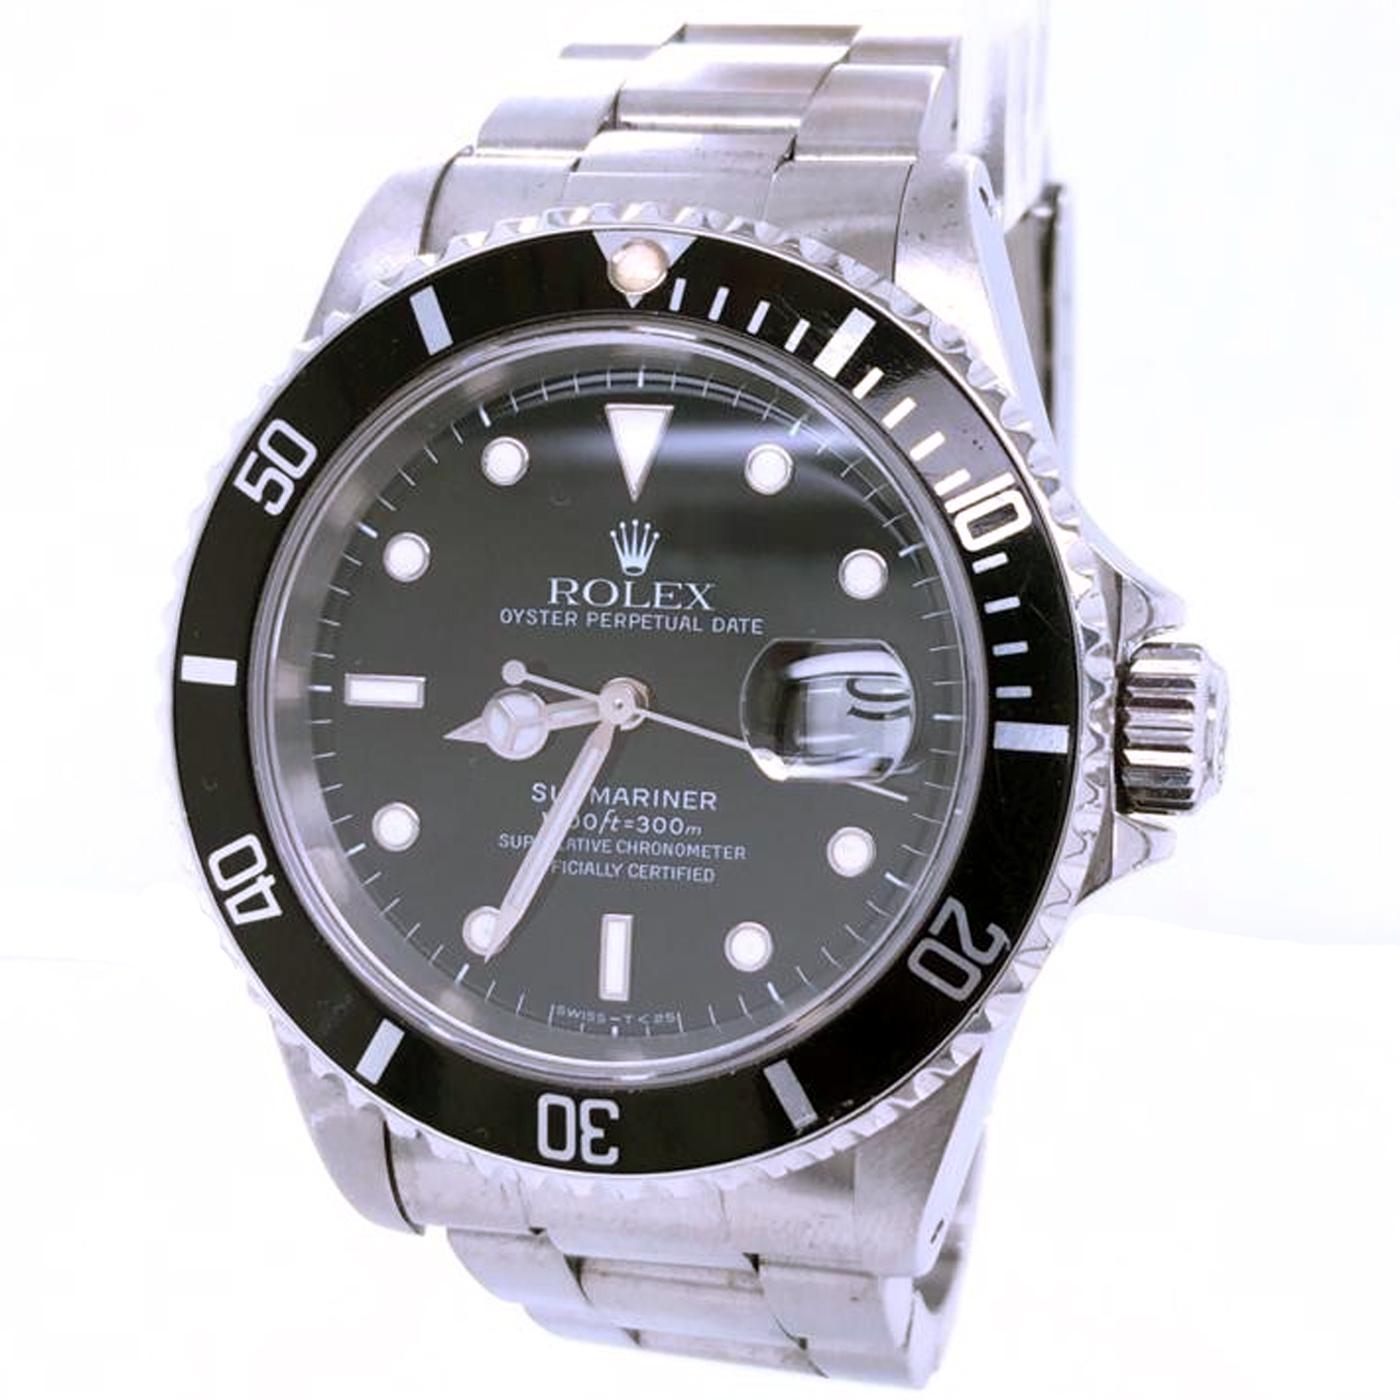 Launched in 1953, the Submariner was the first divers’ wristwatch waterproof to a depth of 100 meters (330 feet). This was the second great breakthrough in the technical mastery of waterproofness, following the invention of the Oyster, the world’s